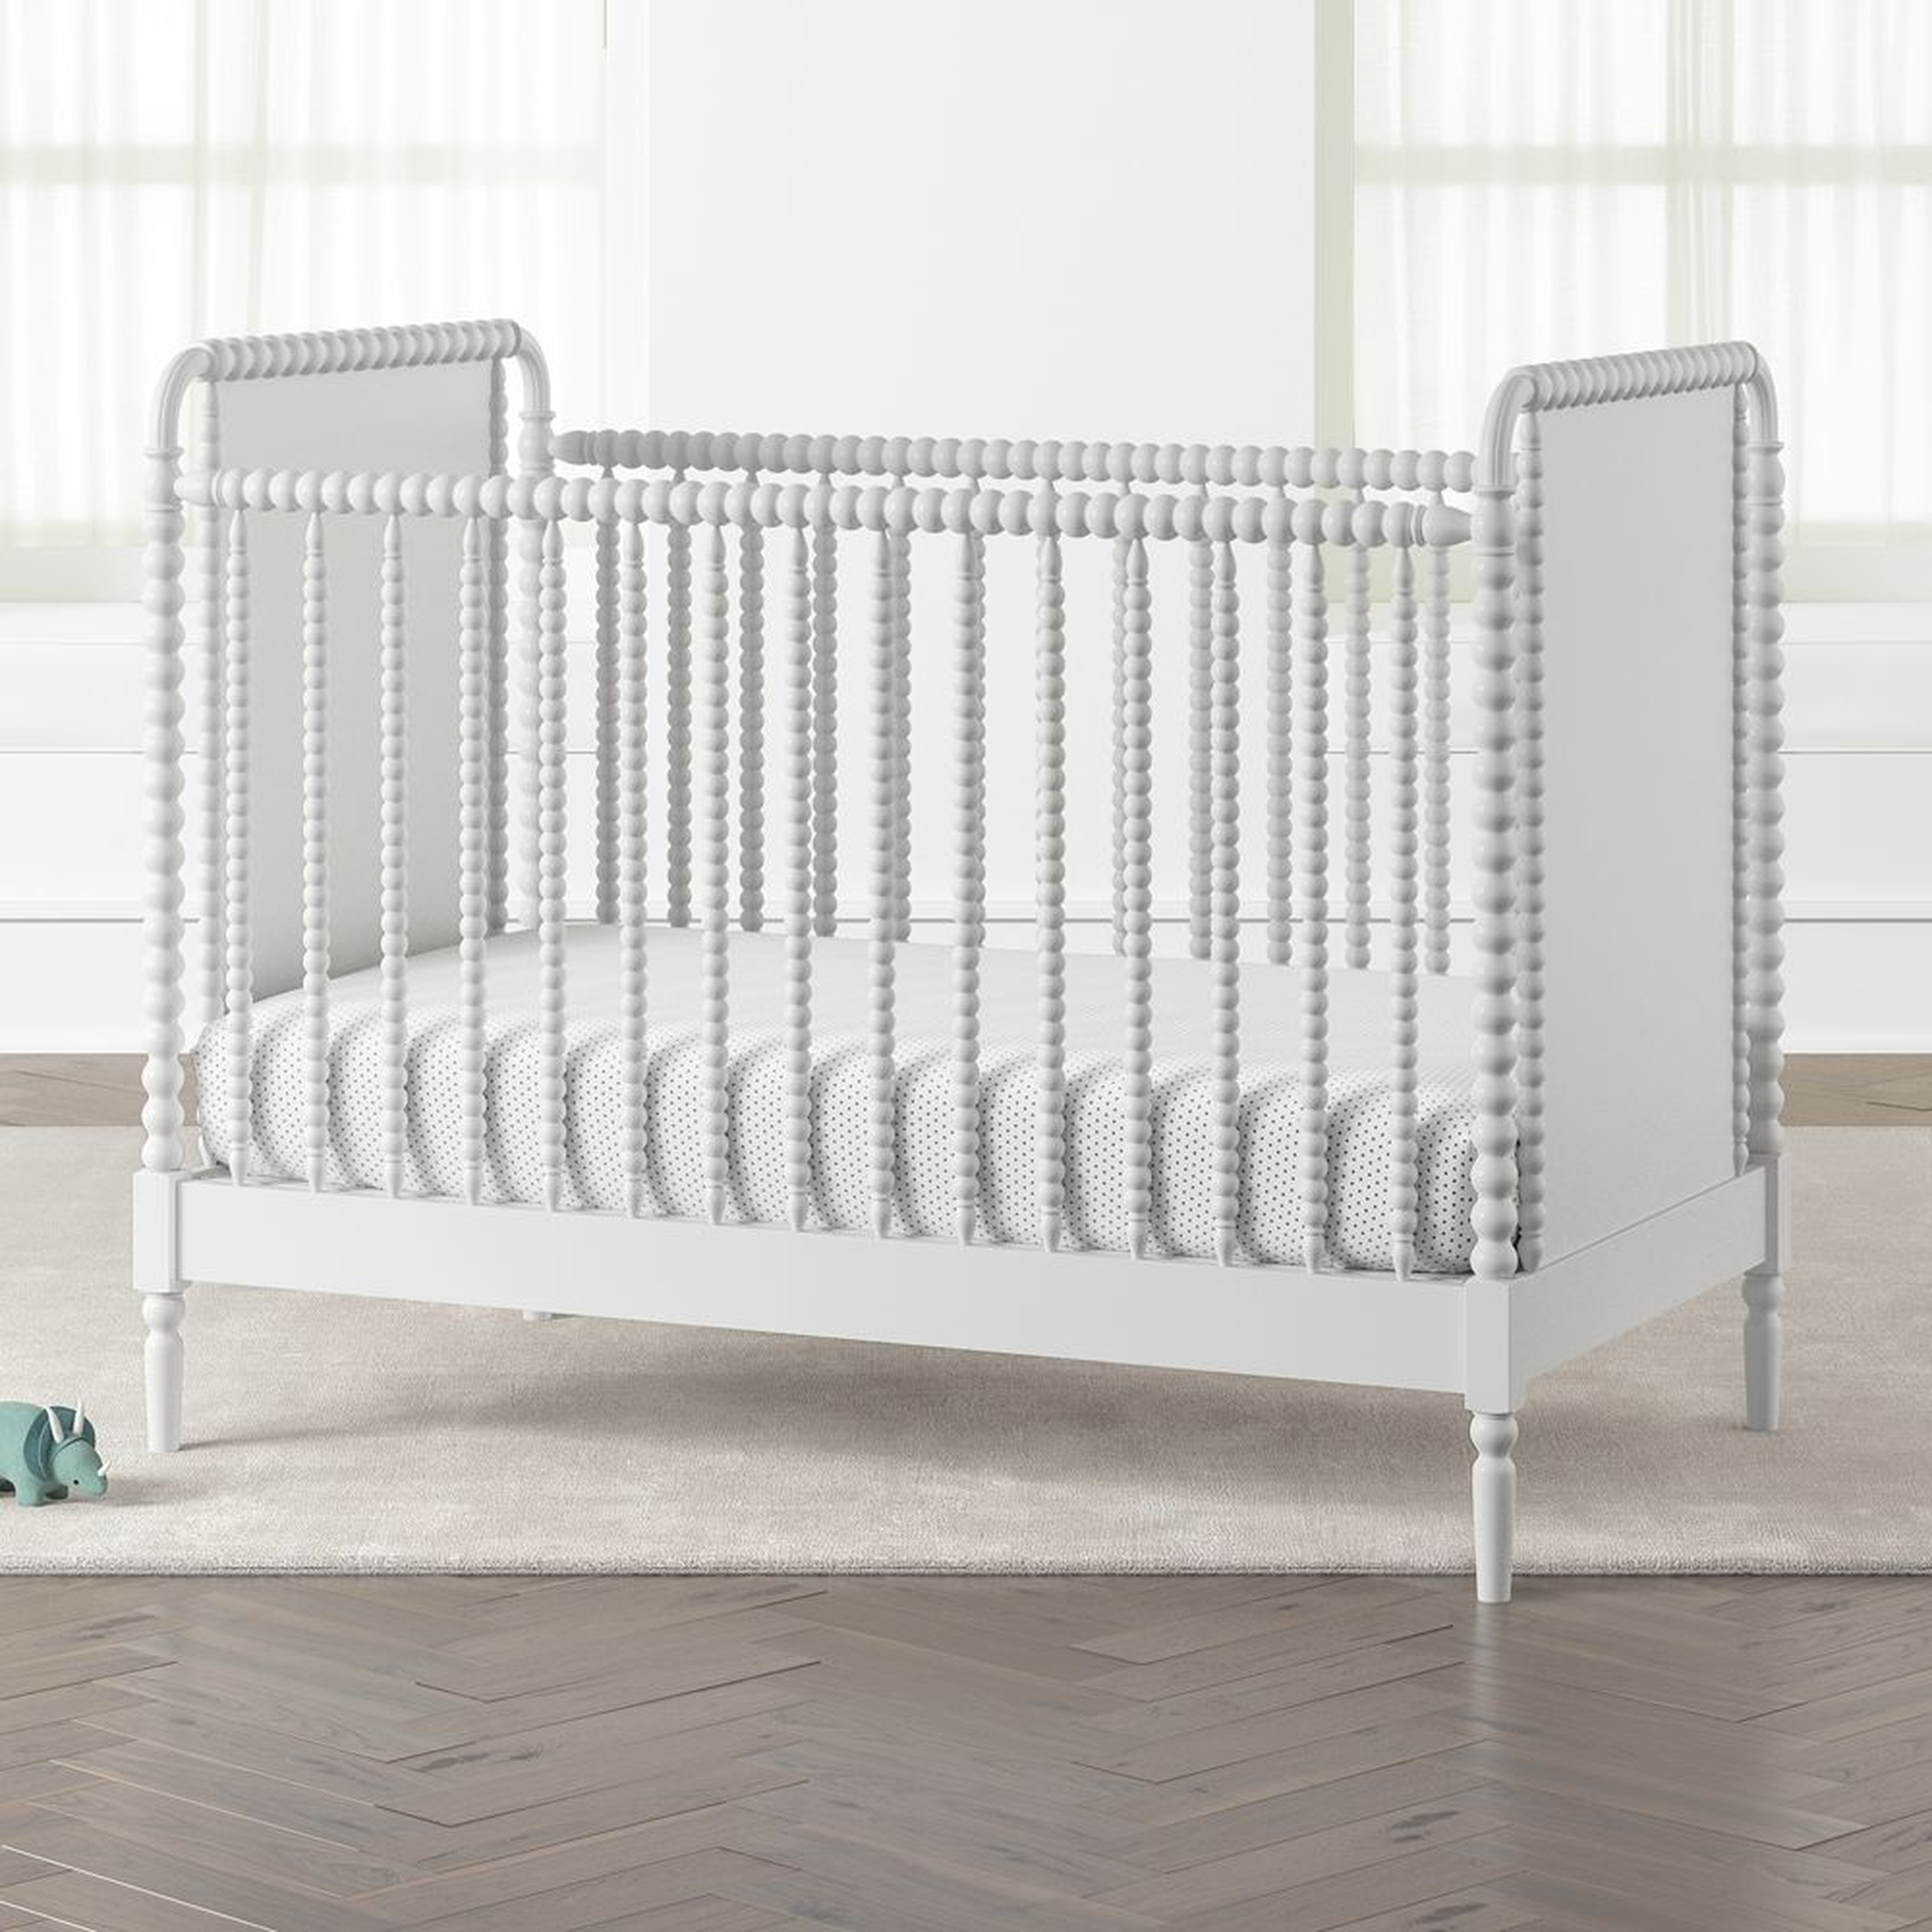 Jenny Lind White Crib - Crate and Barrel